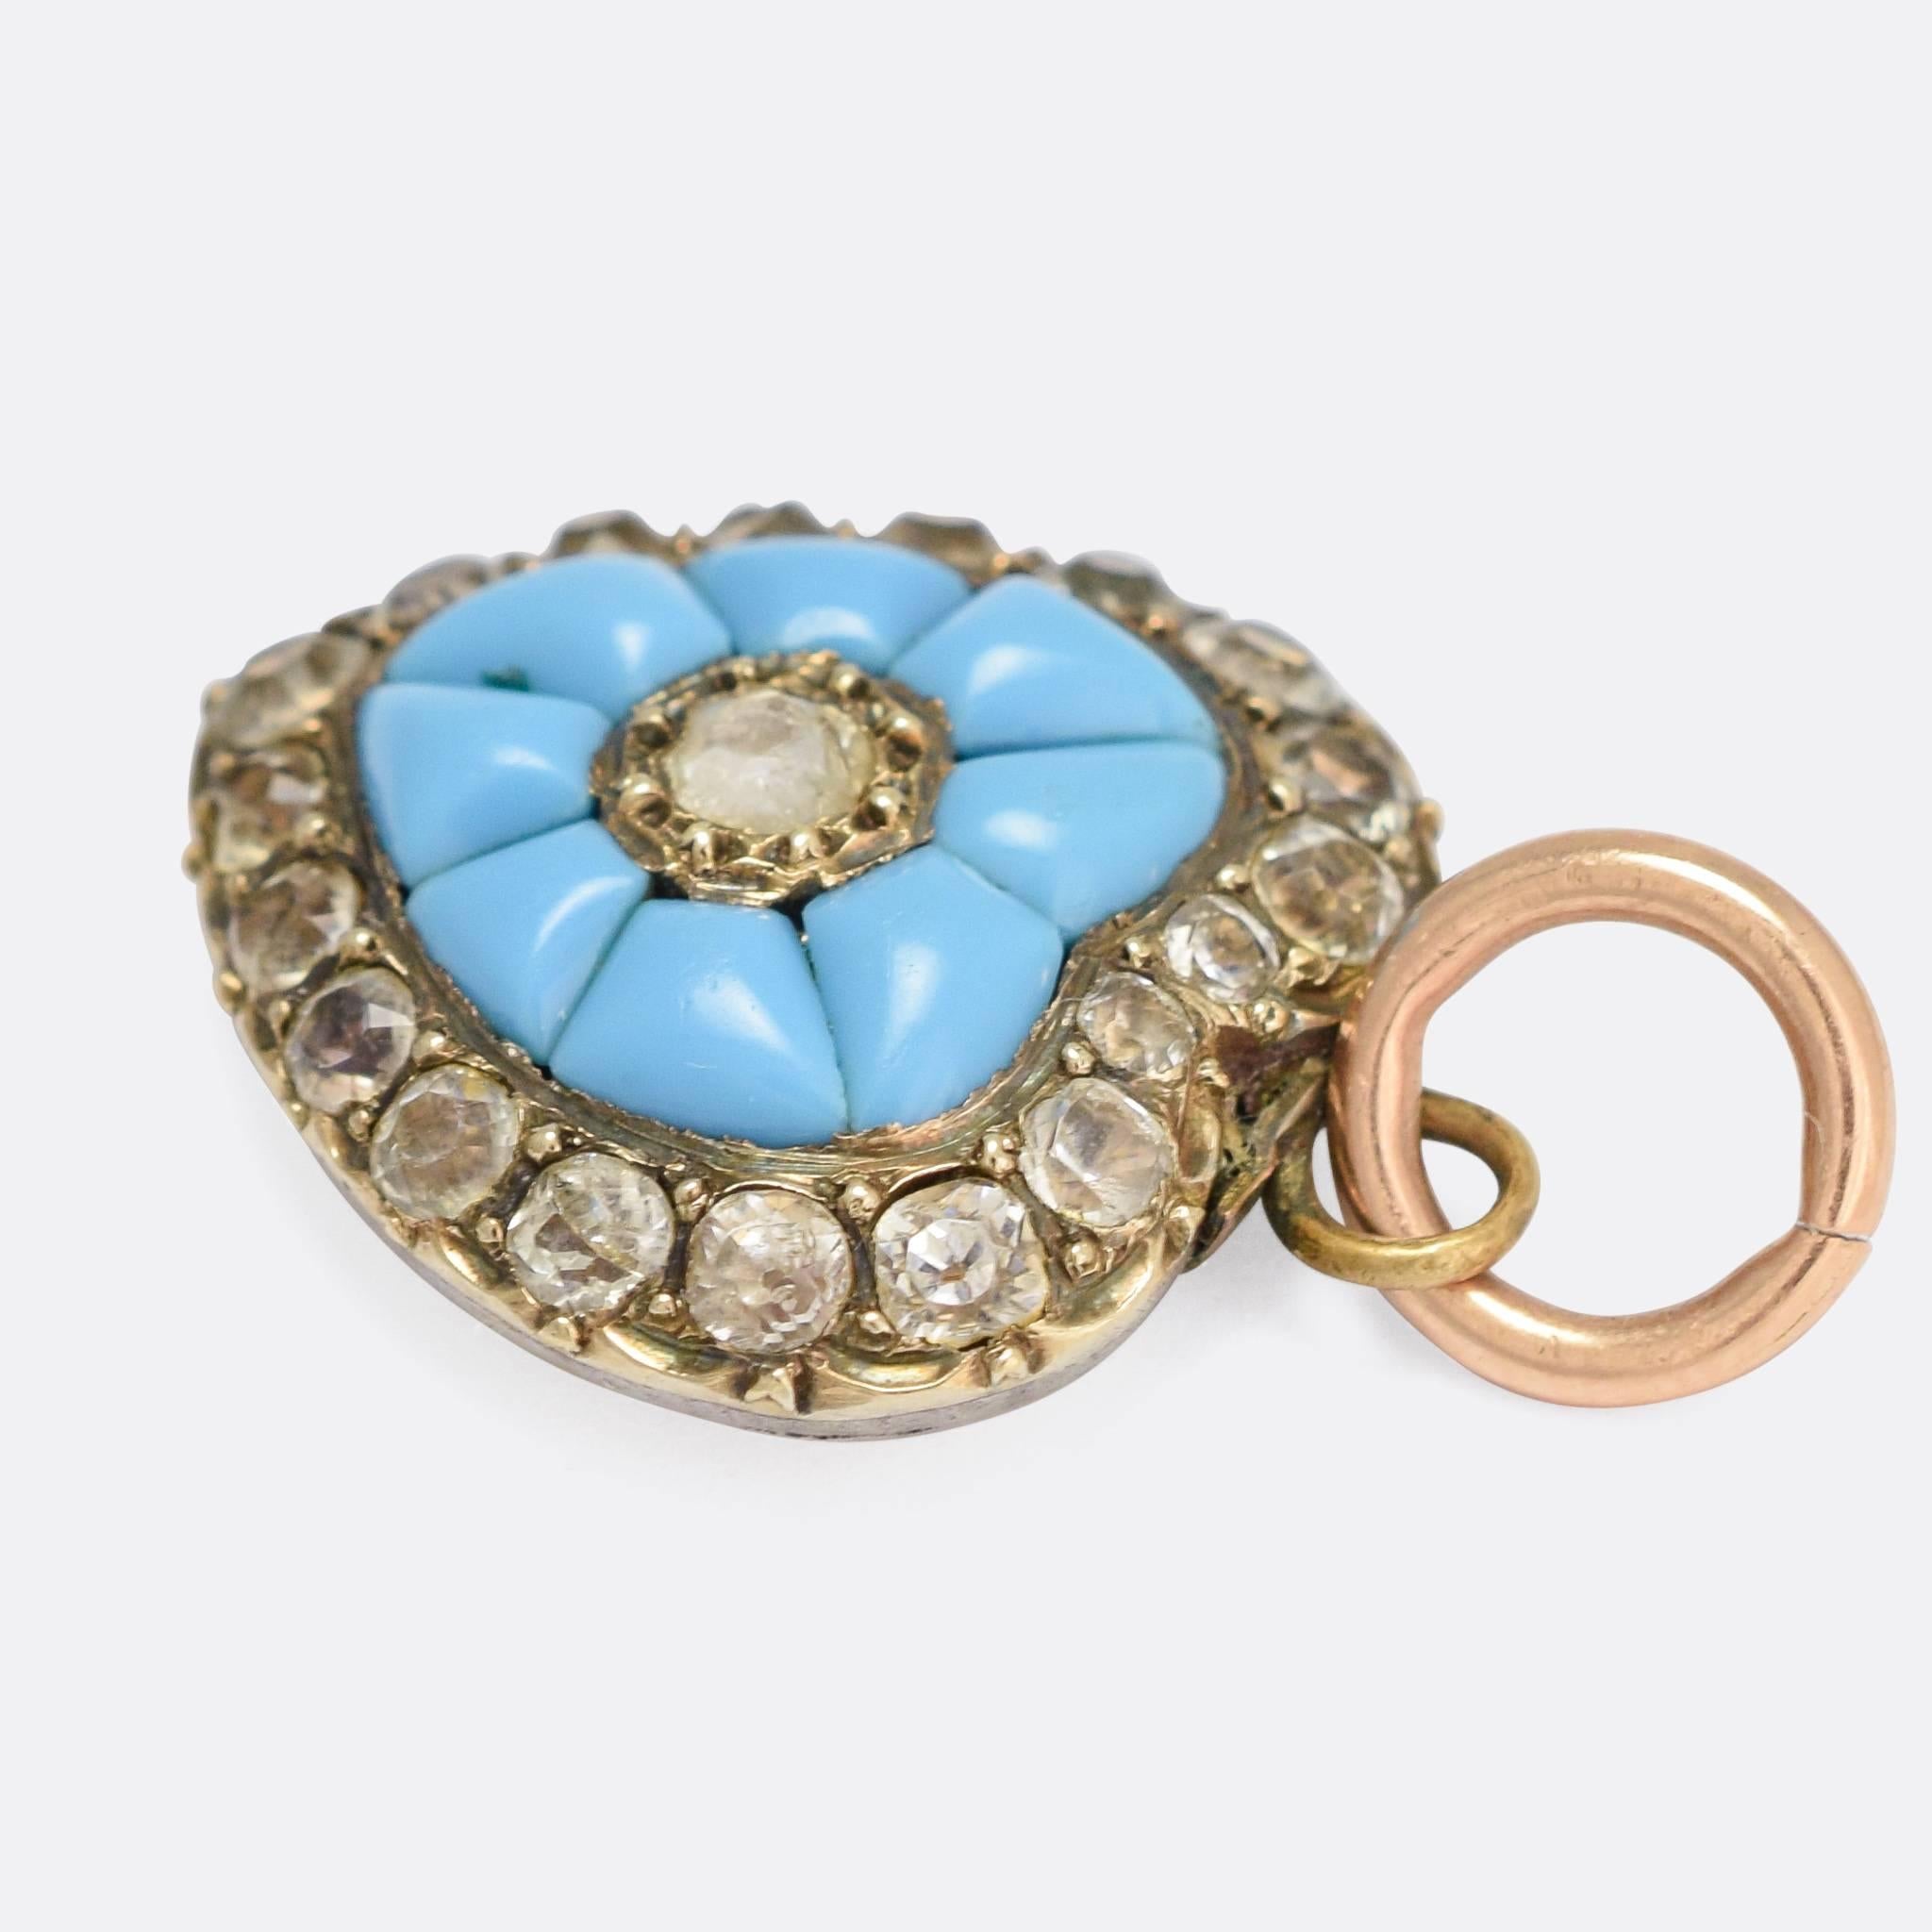 An adorable Victorian heart pendant, set with vibrant turquoise cabochons and bright white paste gems. The piece dates to c.1840, and remains in remarkably good condition - the foil-backed pastes still shine brightly, on account of the light